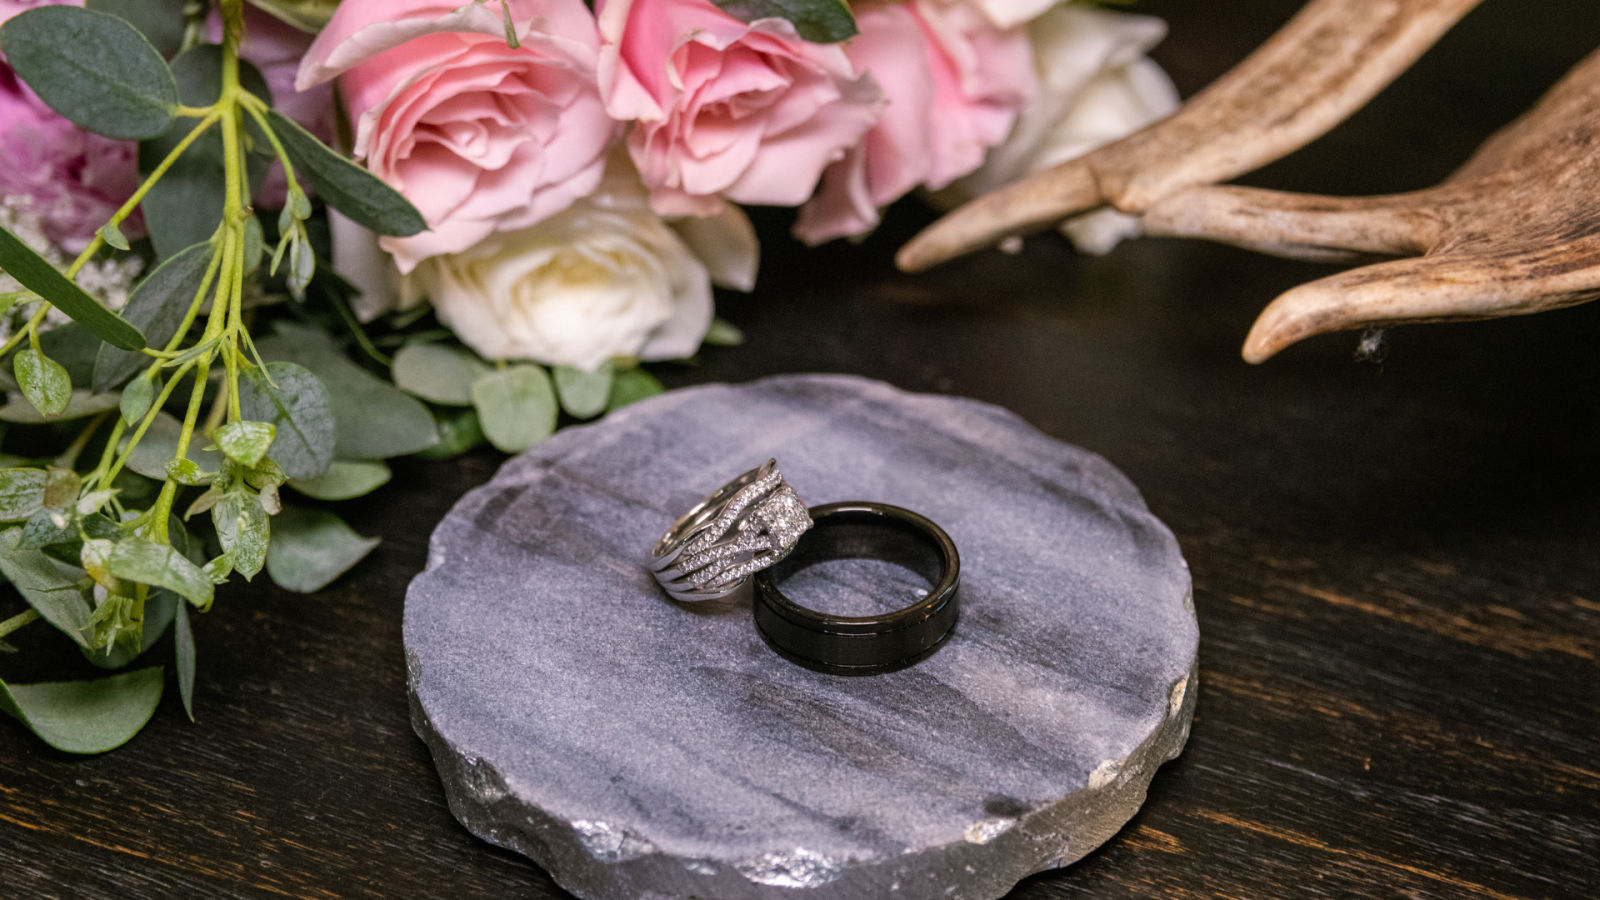 When to Give a Promise Ring: Timing, Reasons, and What to Say – Gear  Jewellers